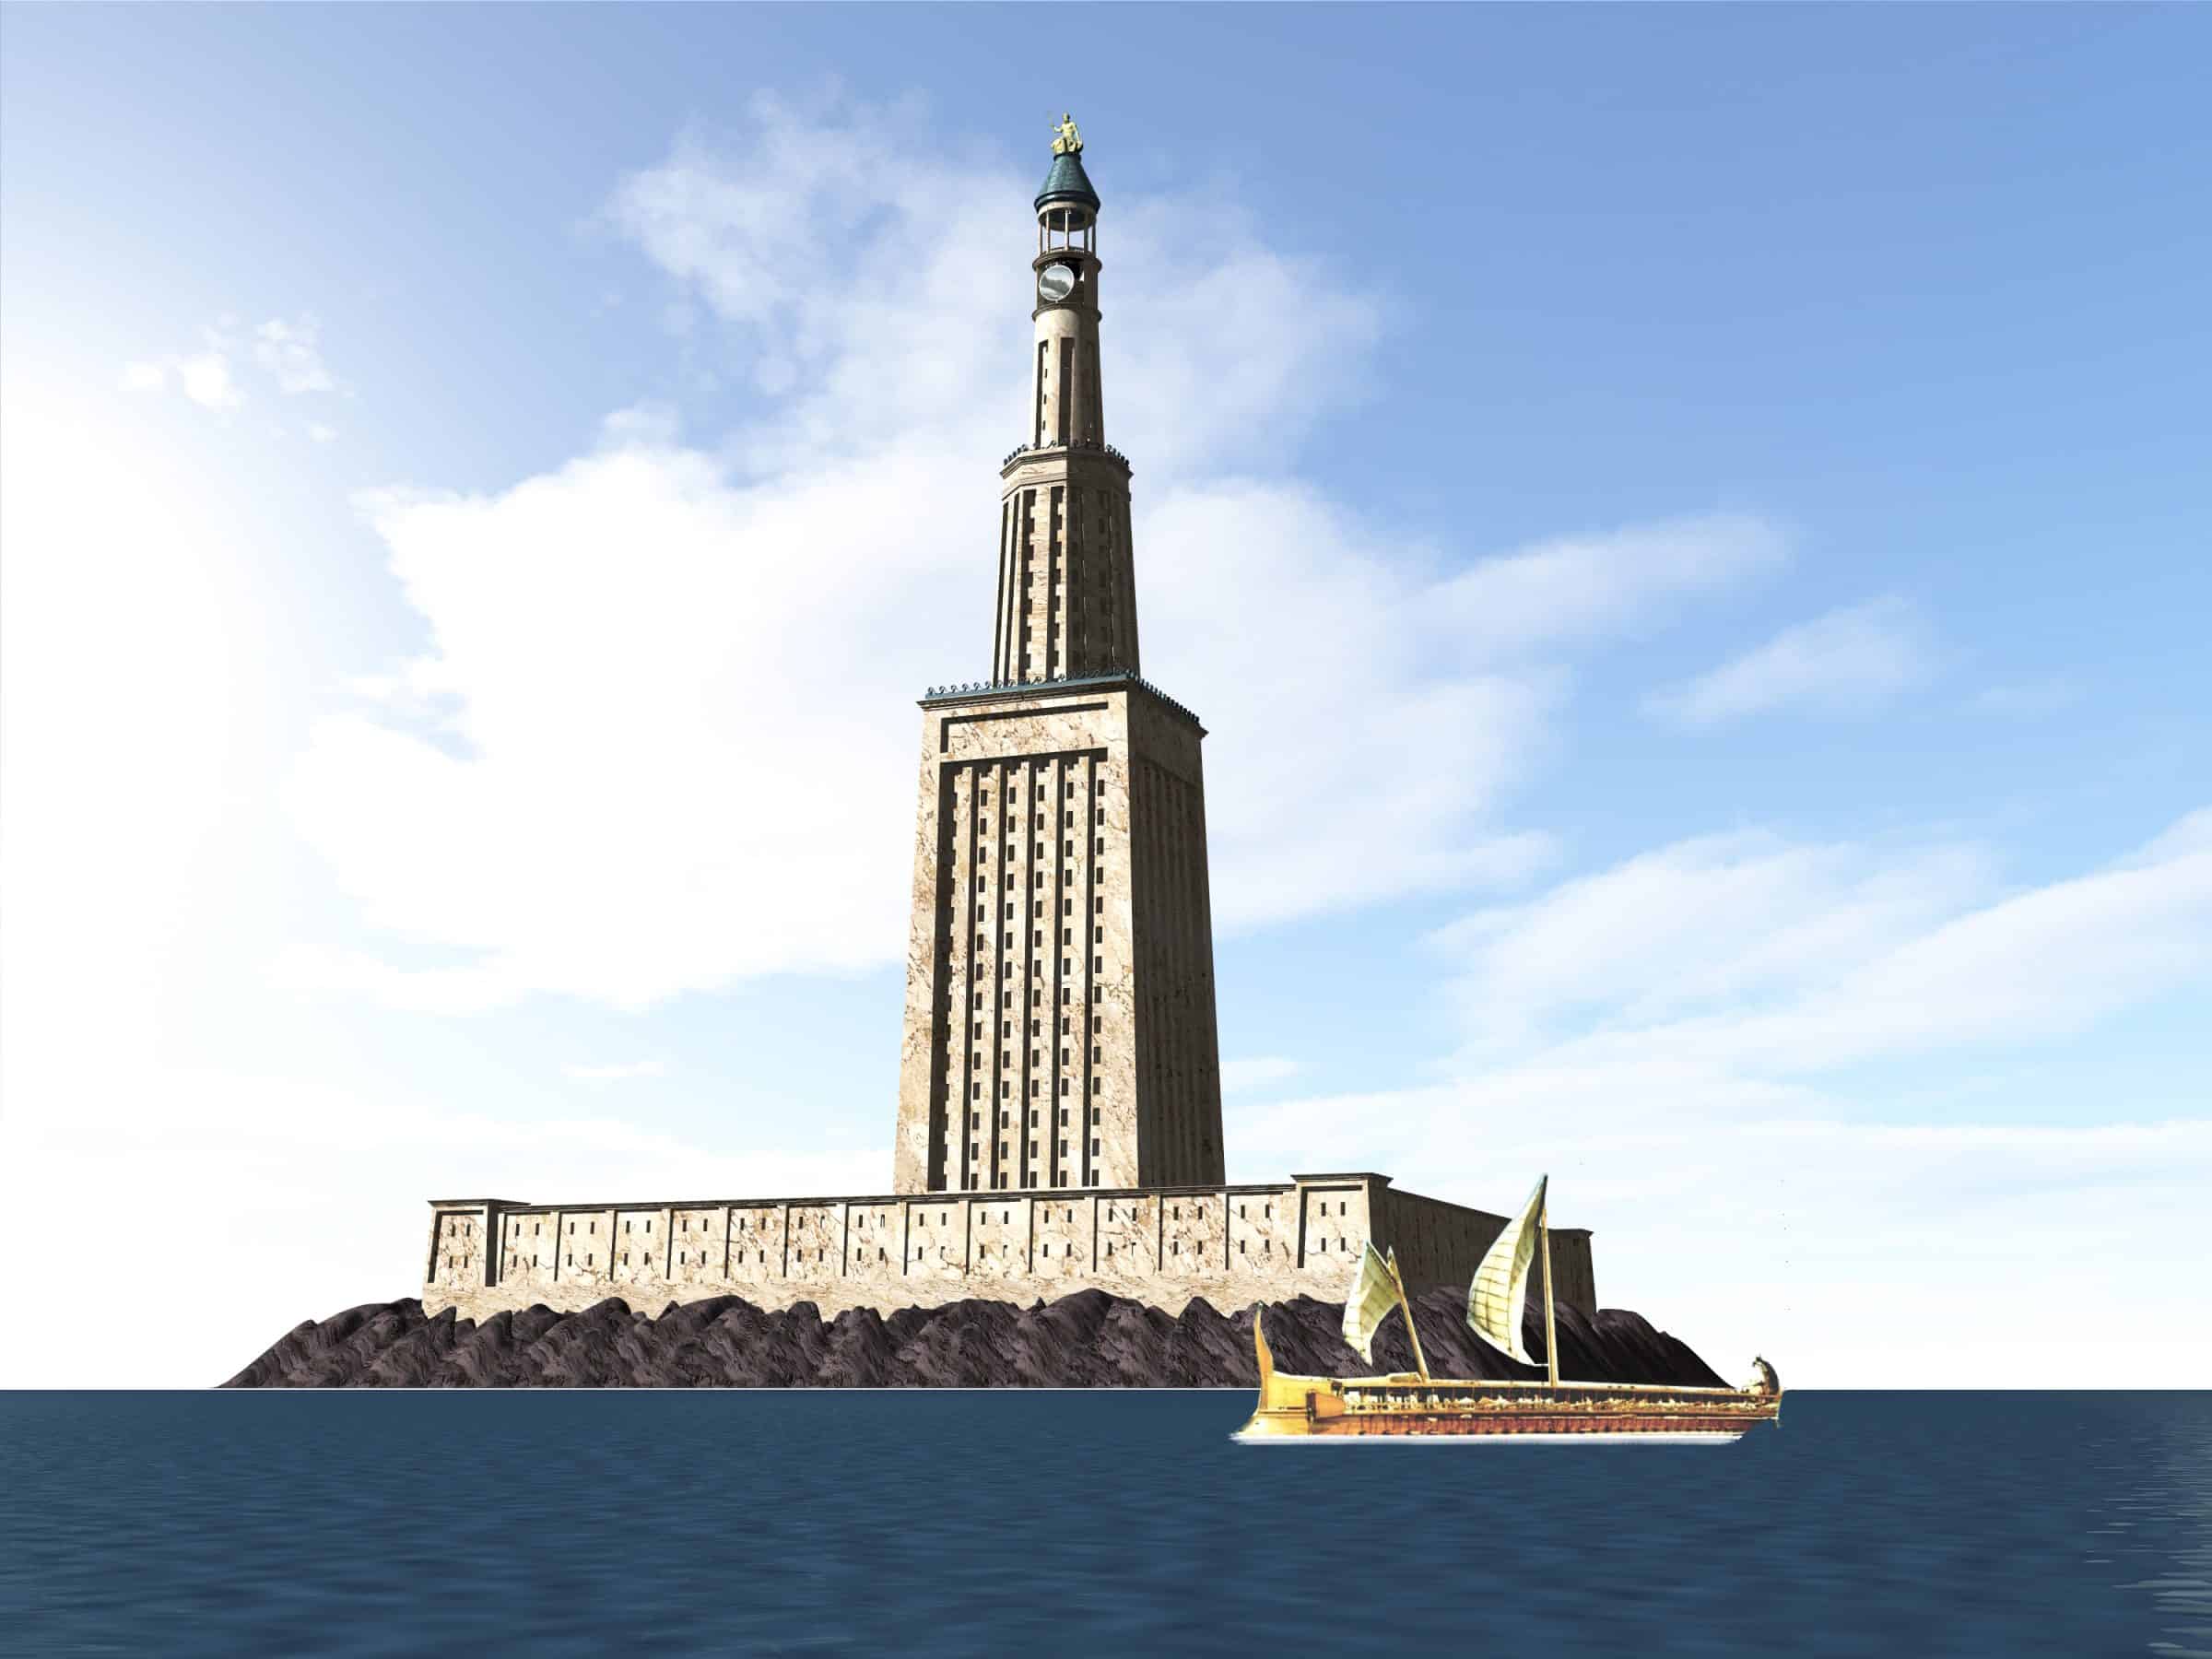 The Lighthouse (Pharos) of Alexandria | Illustration by Emad Victor SHENOUDA, https://commons.wikimedia.org/w/index.php?curid=27872767